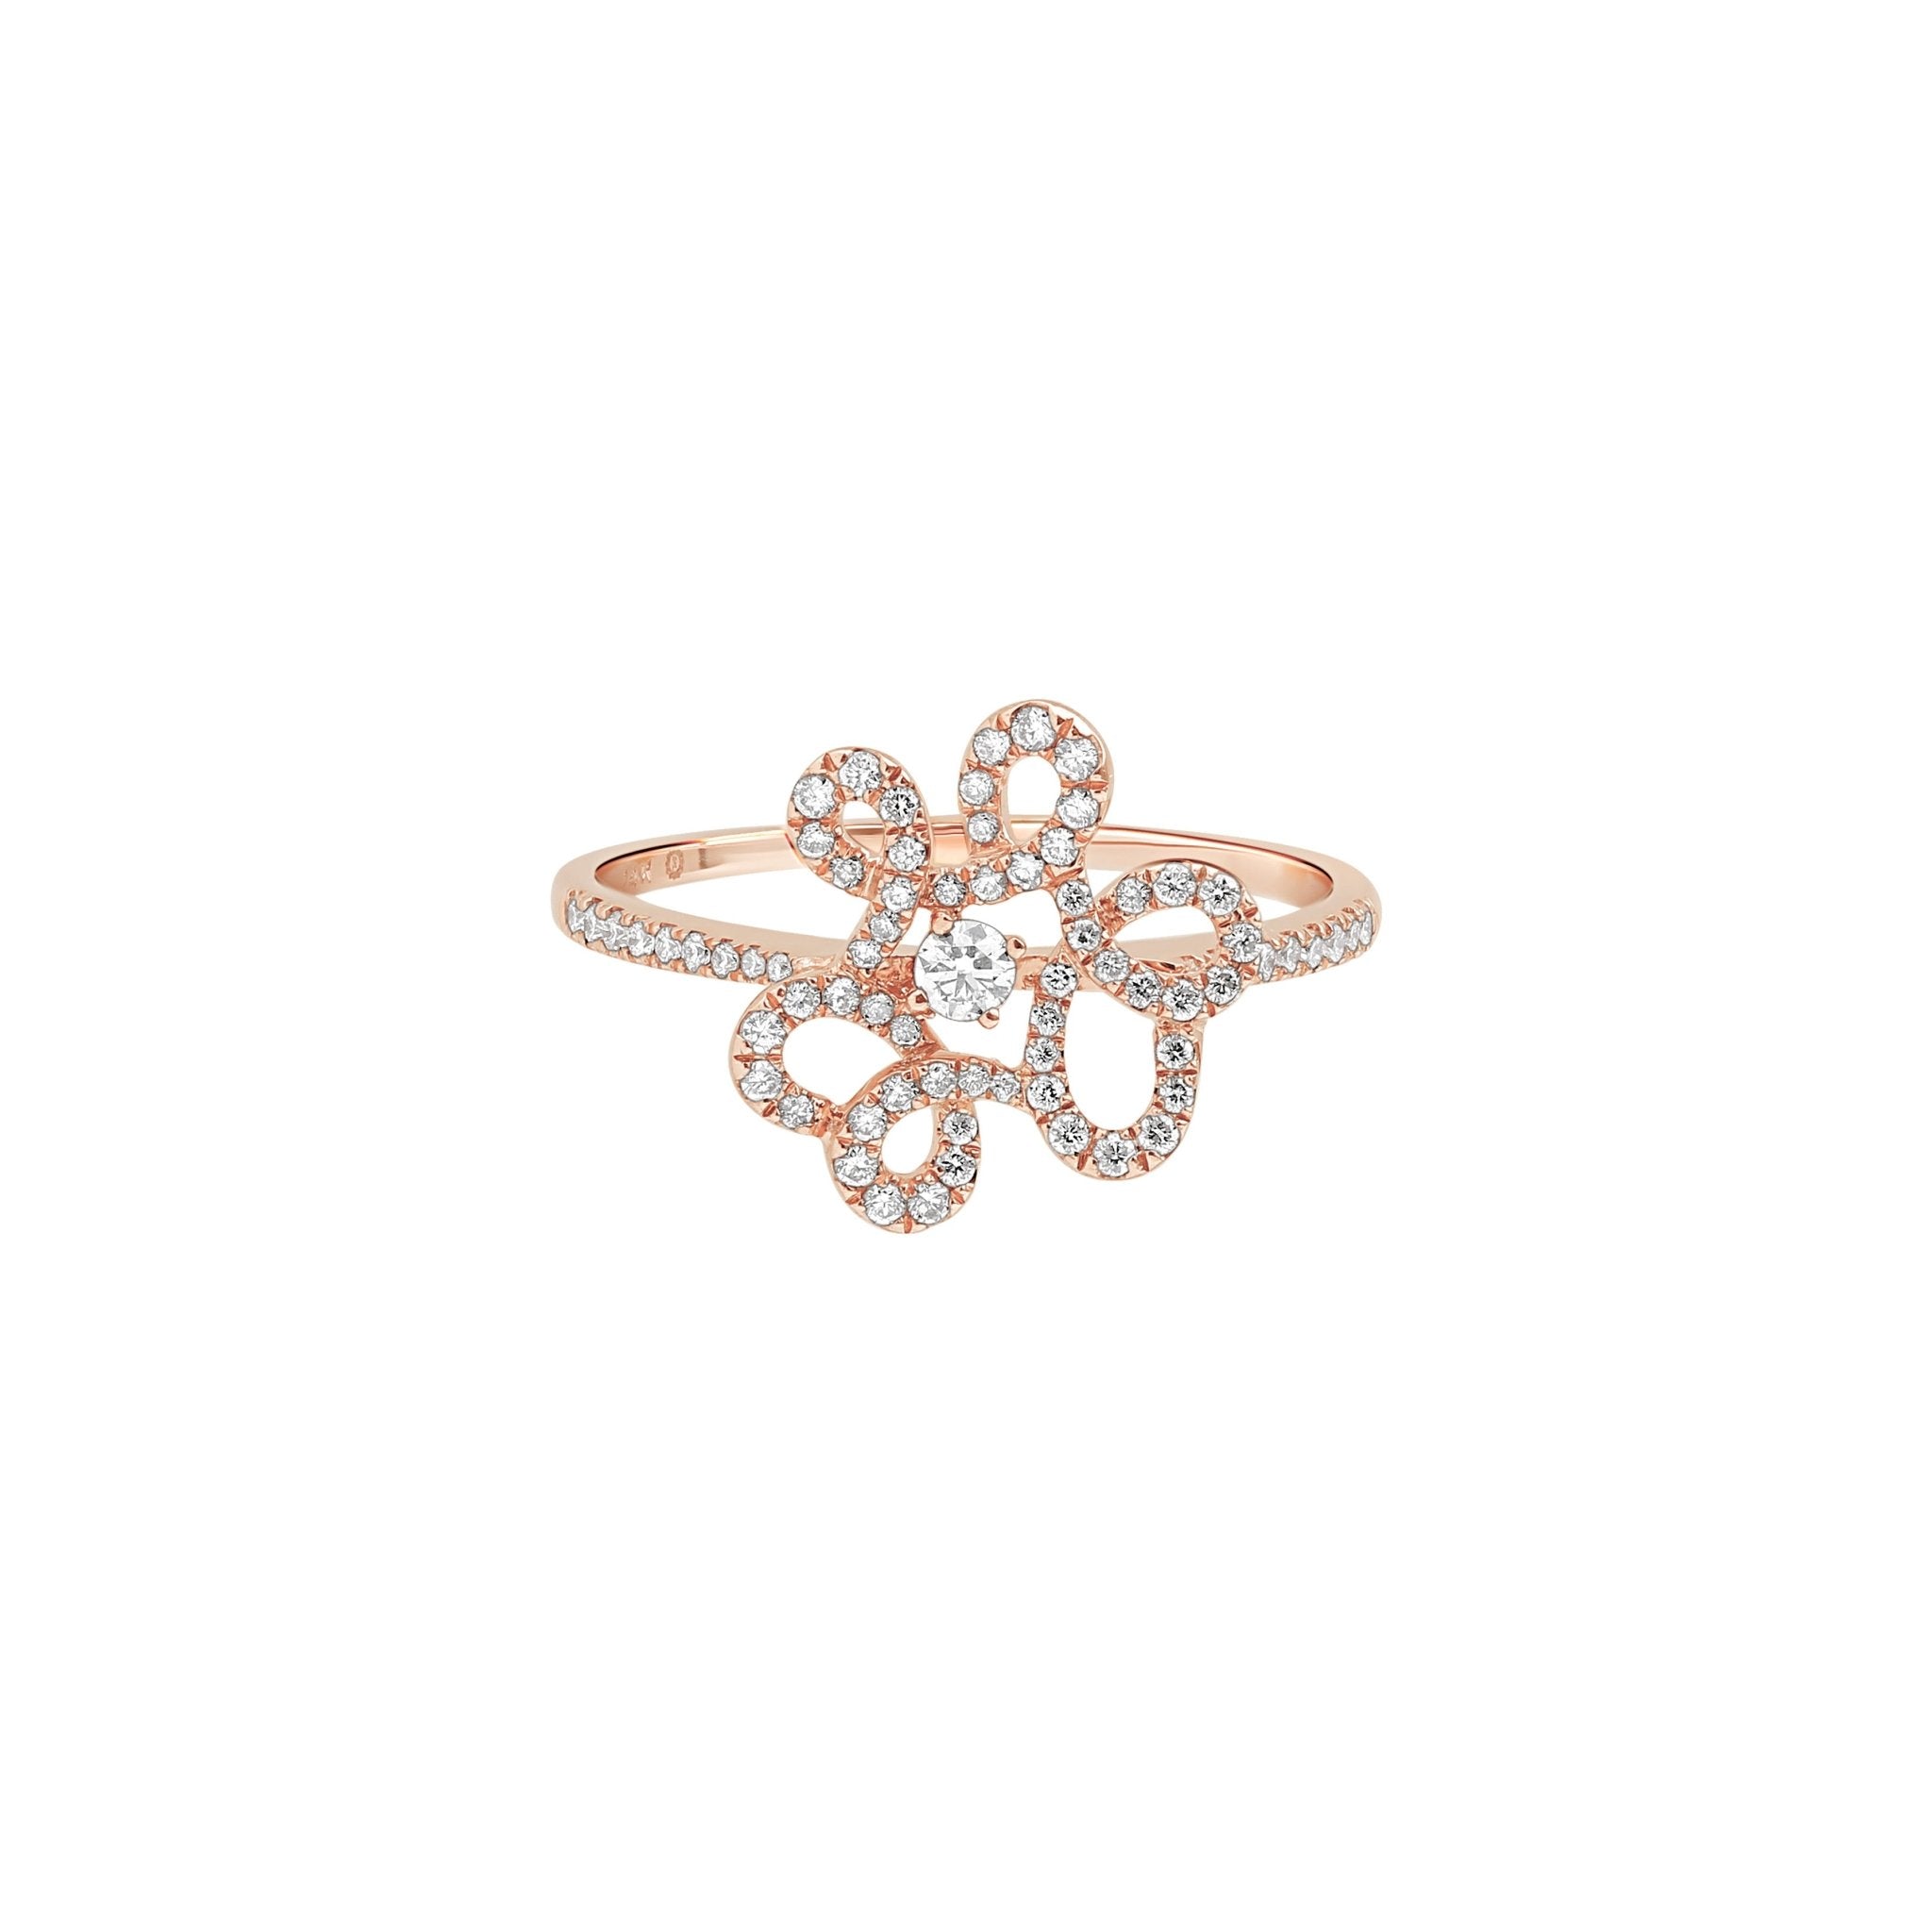 Abstract Diamond Flower Cocktail Ring Rings Estella Collection #product_description# 17511 Cocktail Ring Diamond Flower Jewelry #tag4# #tag5# #tag6# #tag7# #tag8# #tag9# #tag10# 6